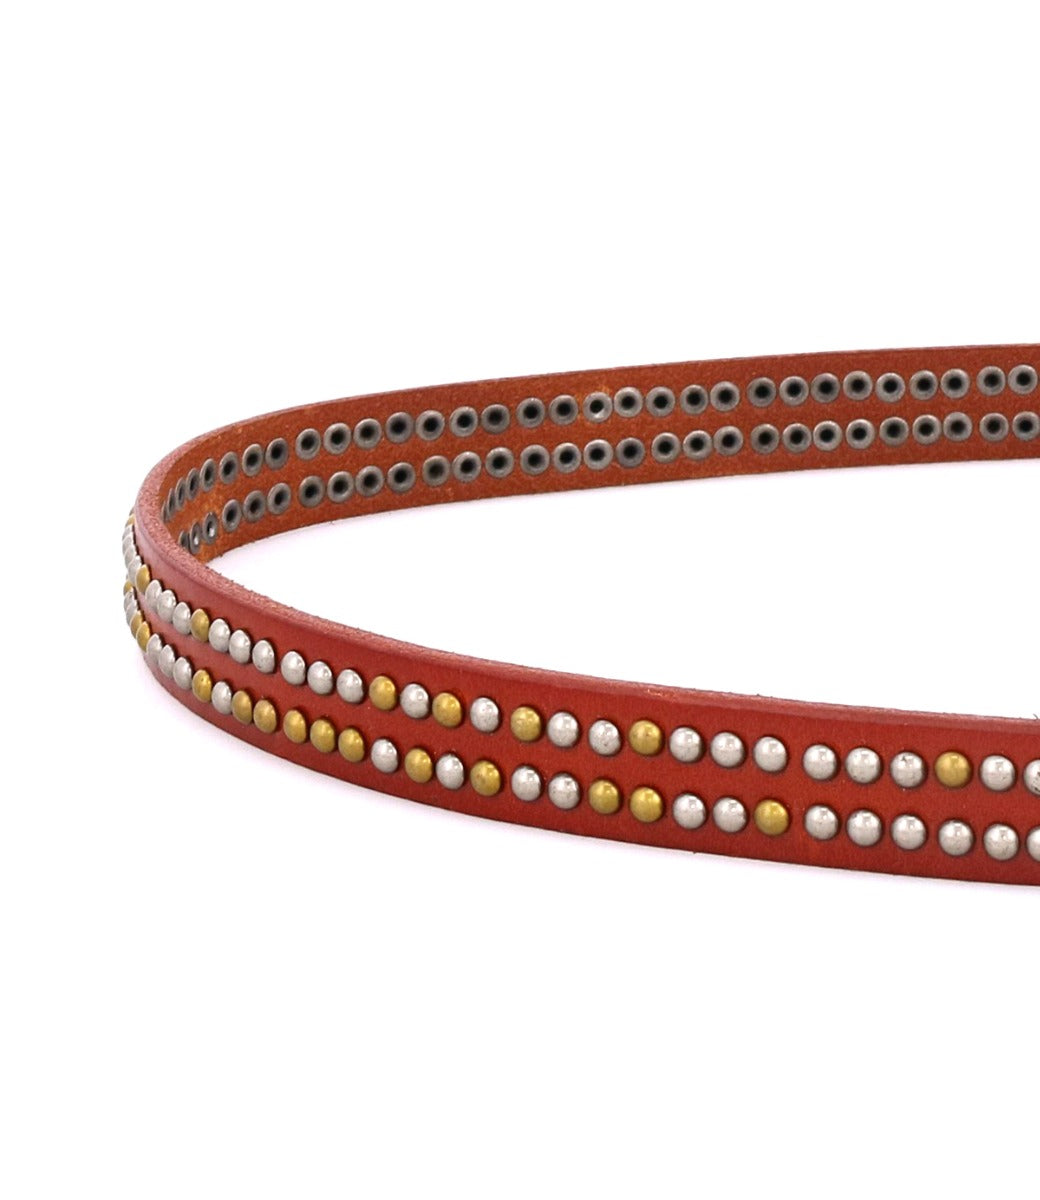 A red leather Rico belt with gold and silver studding by Bed Stu.